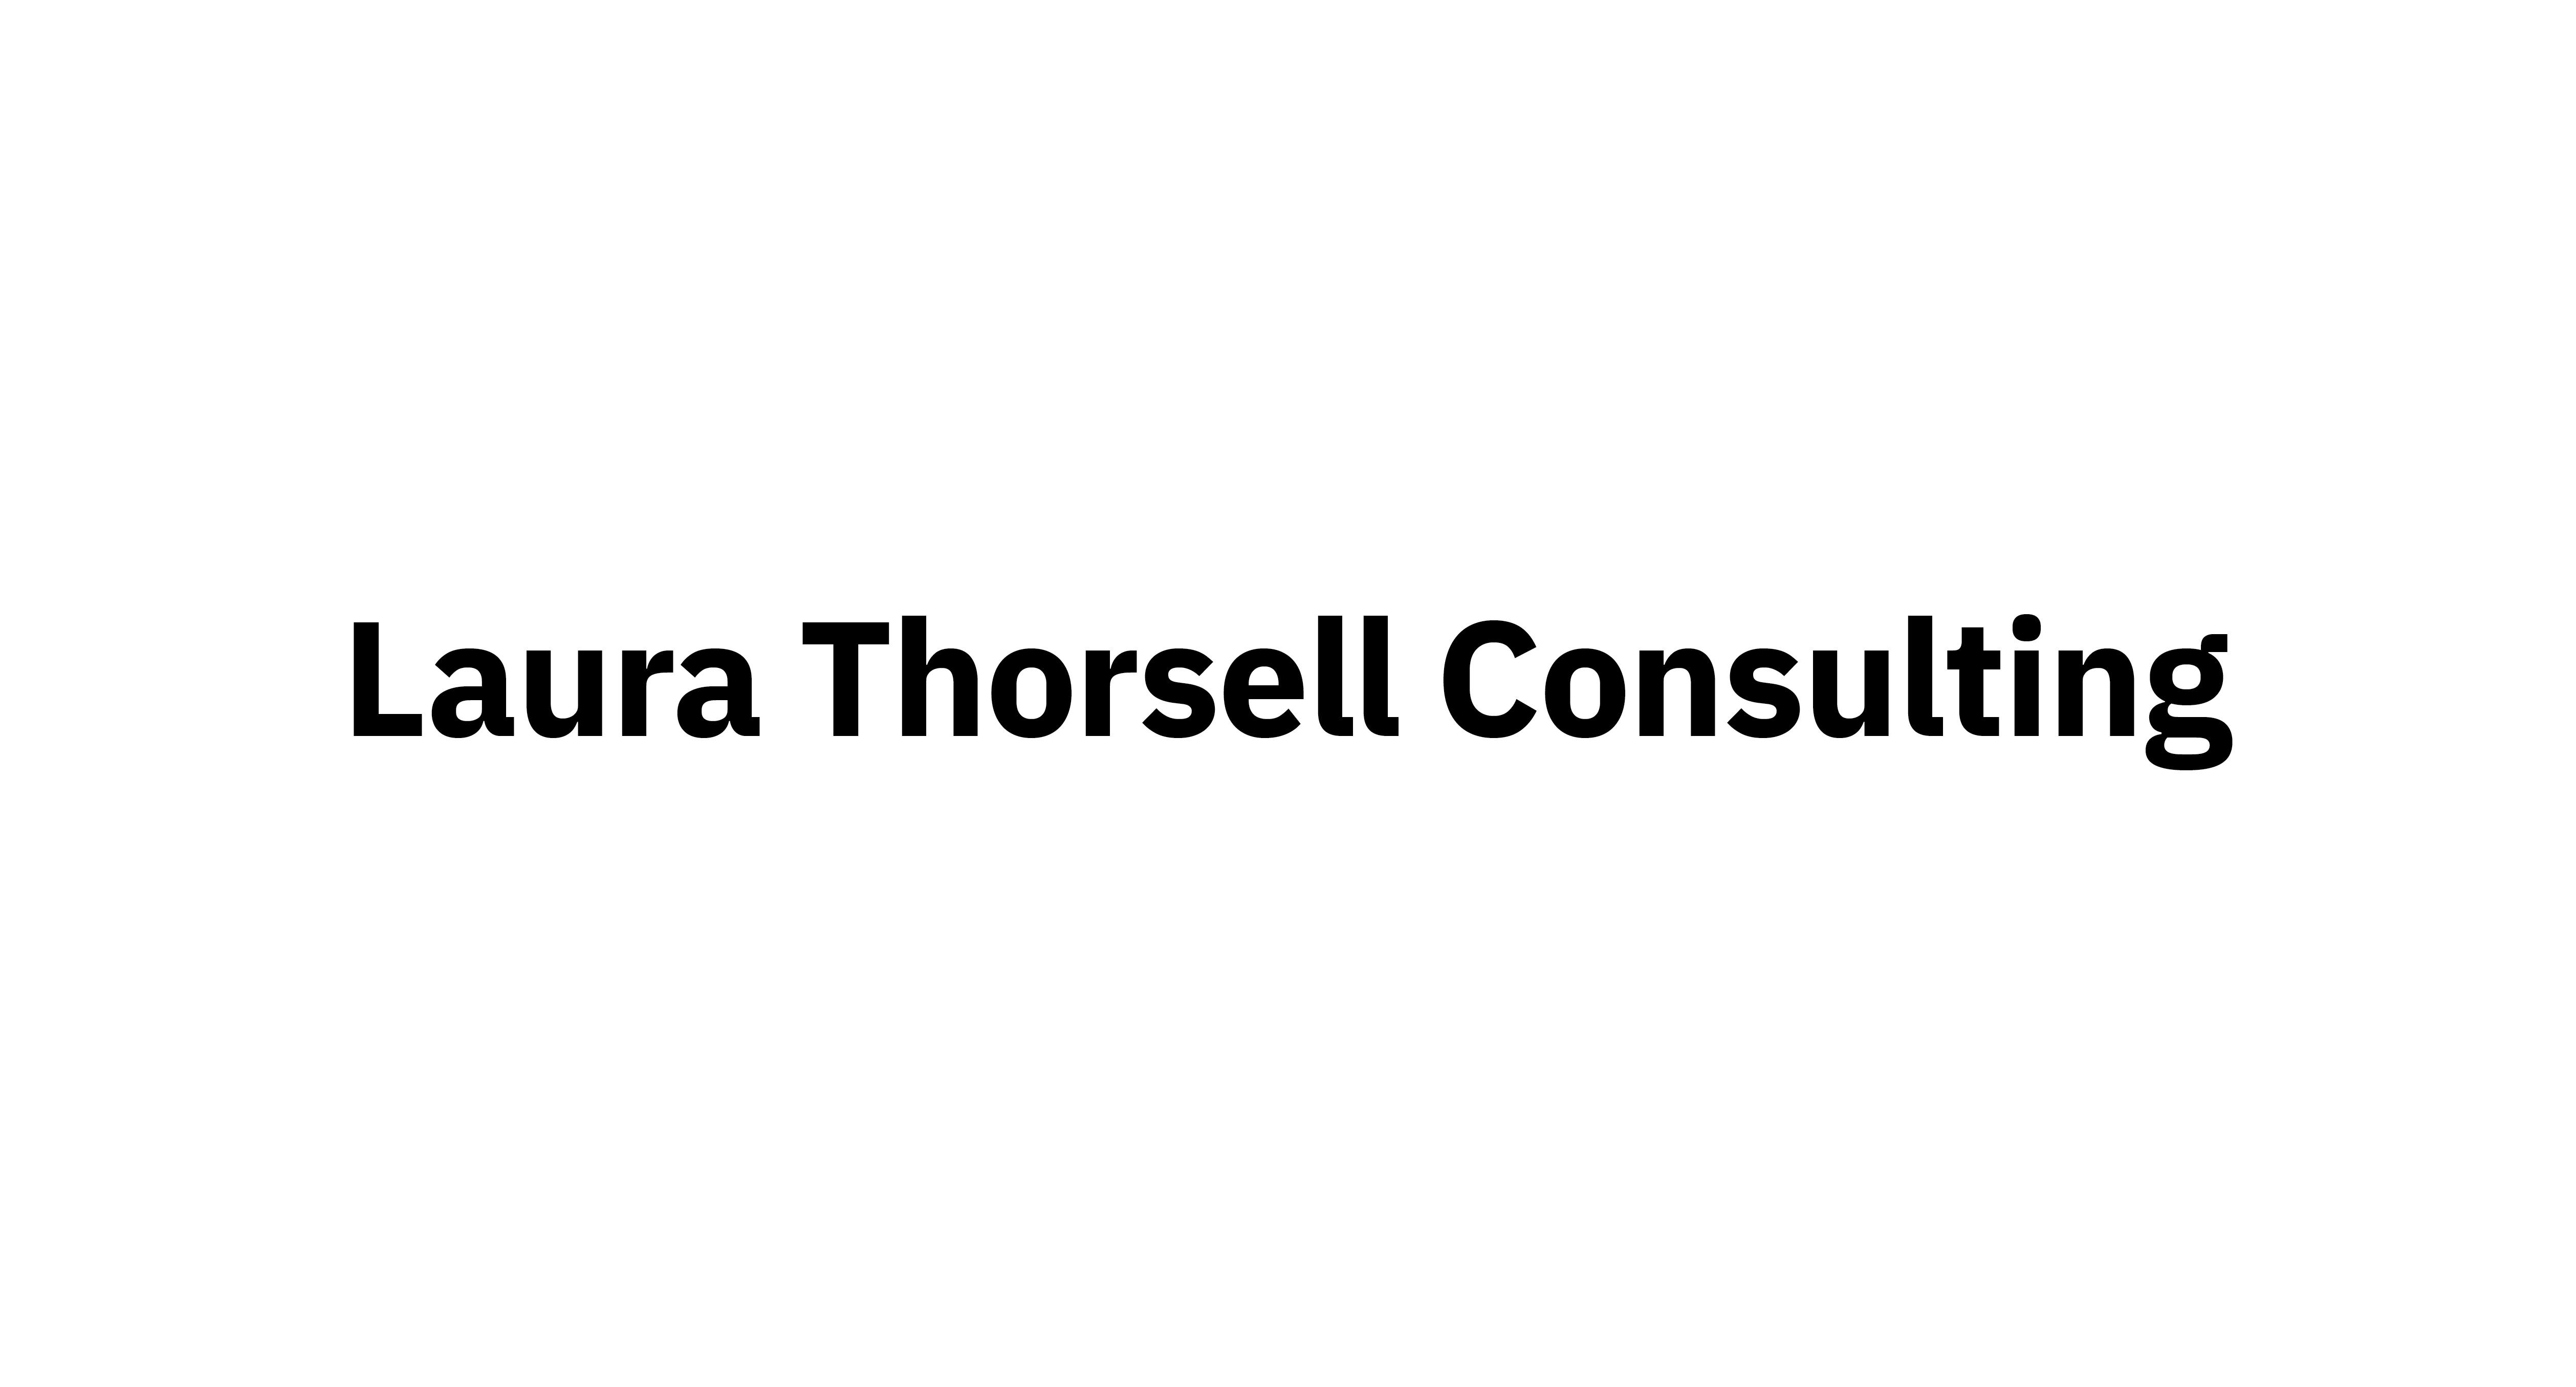 Partner Laura Thorsell Consulting